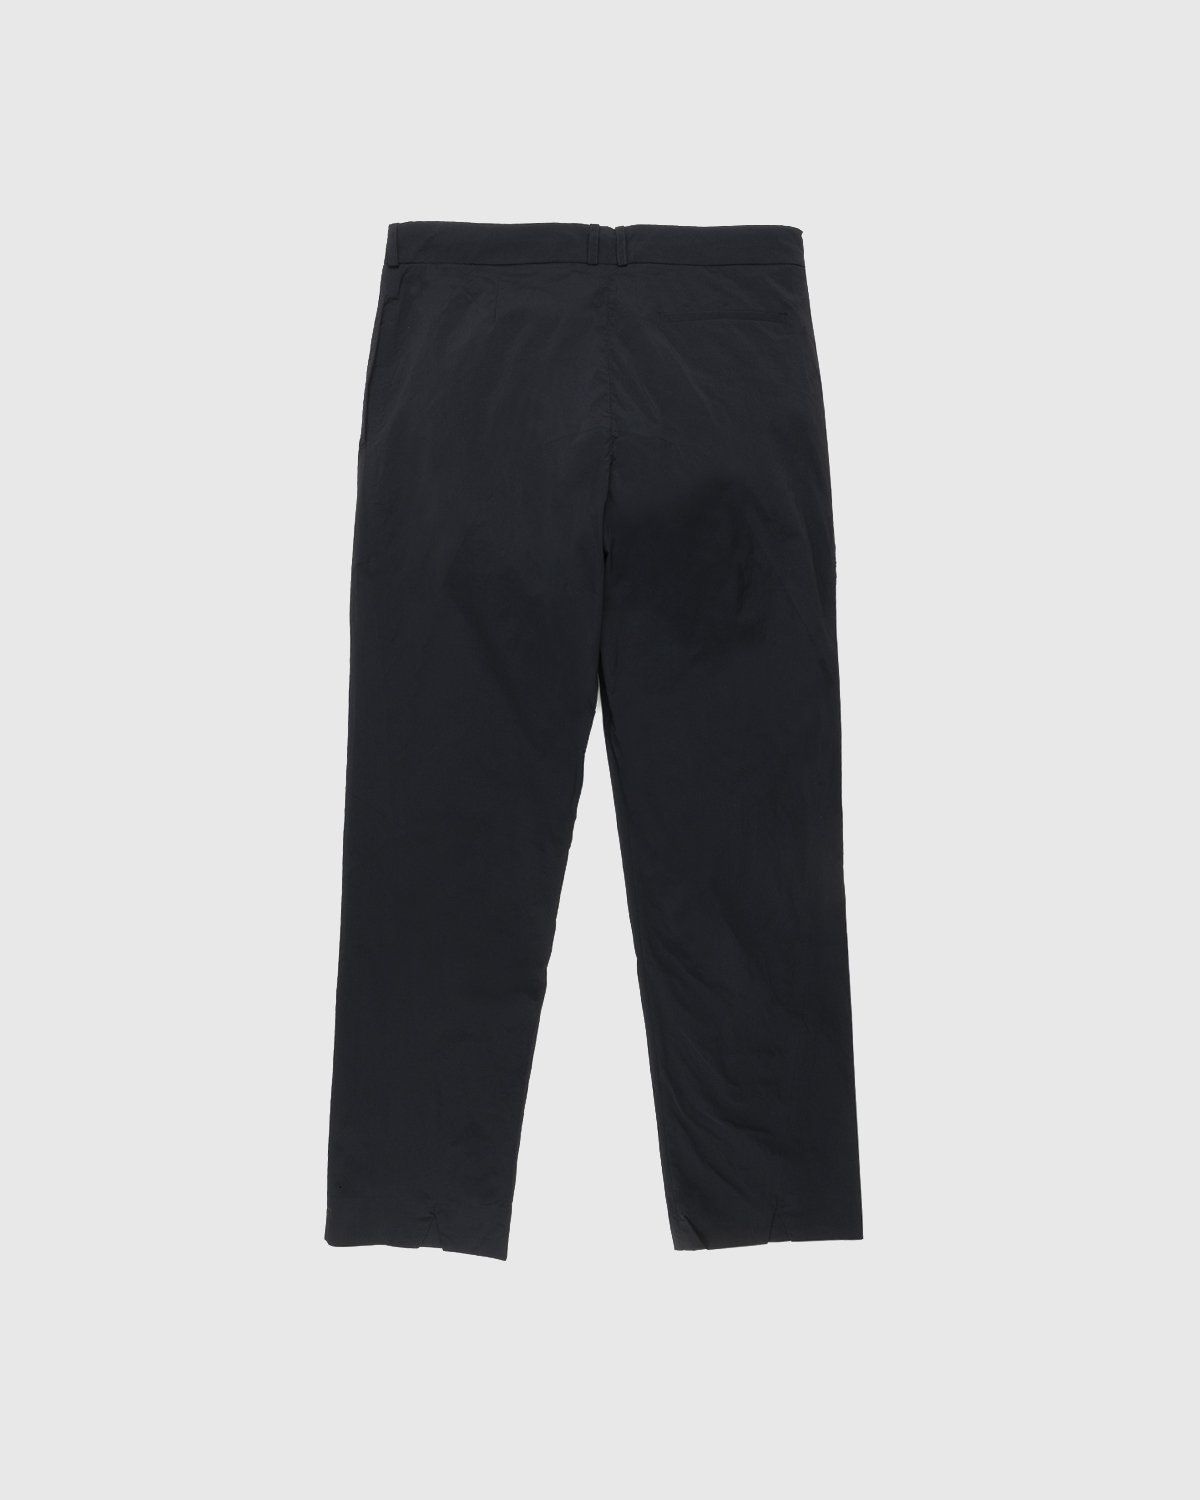 A-Cold-Wall* – Stealth Nylon Pants Black - Trousers - Black - Image 2